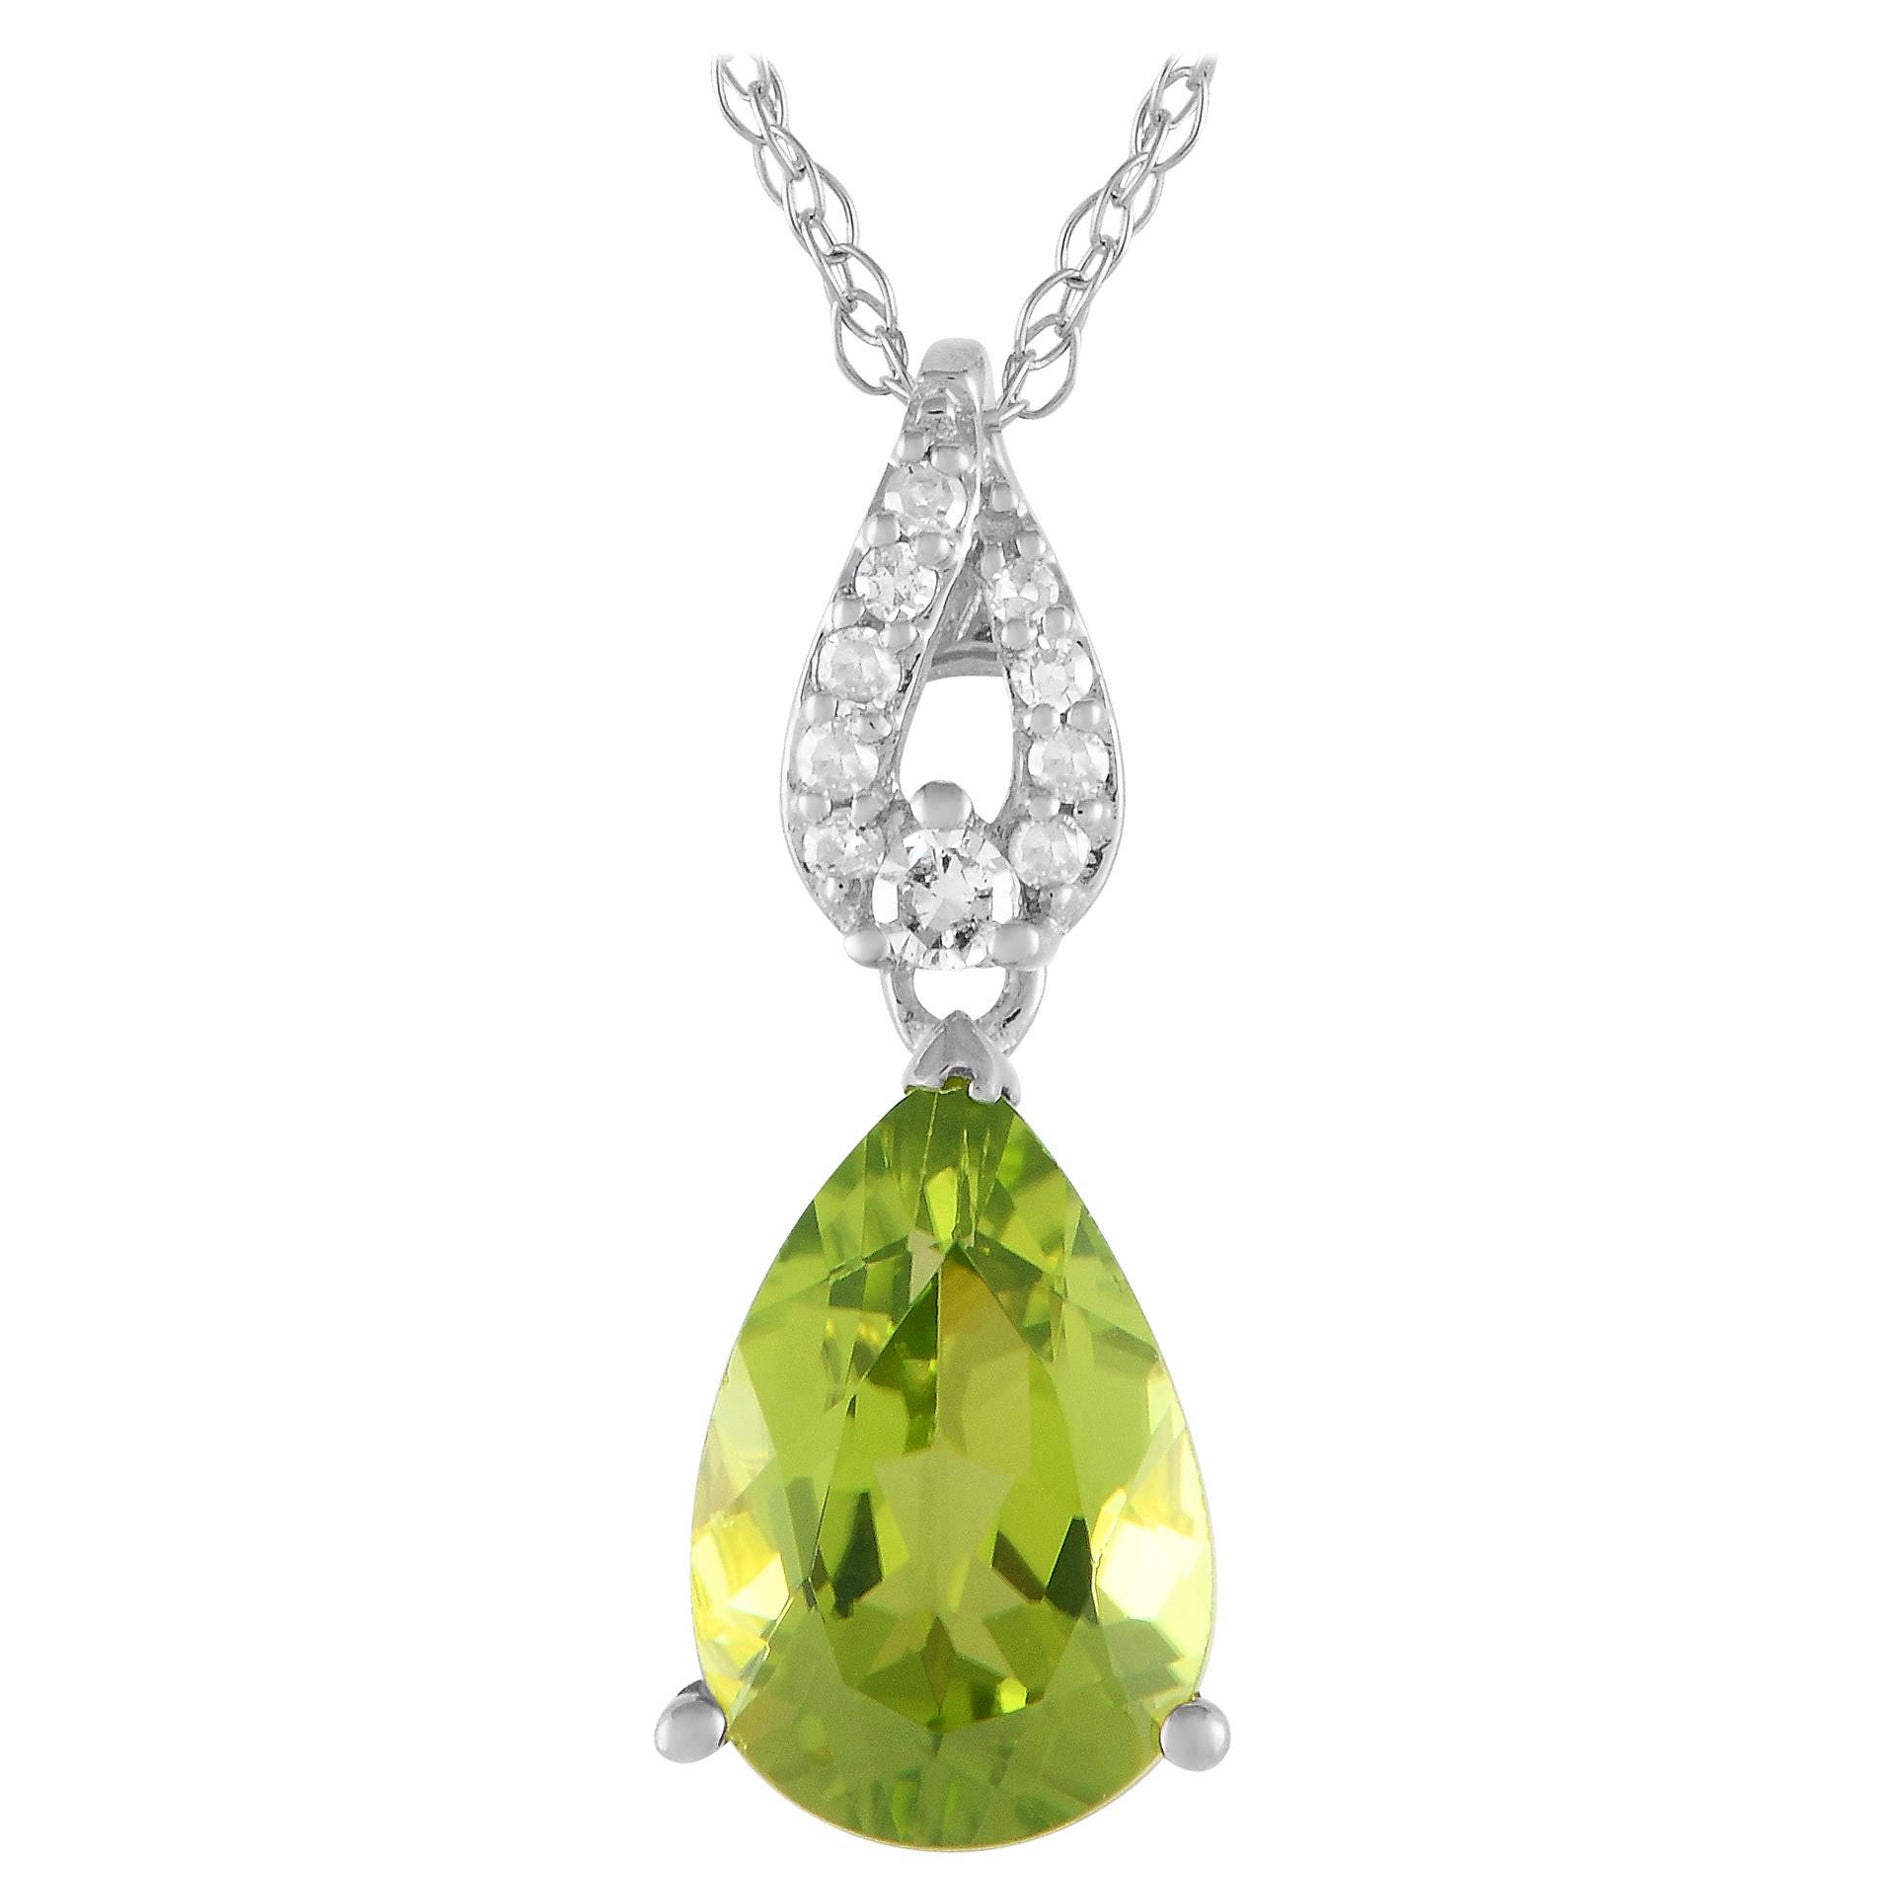 LB Exclusive 14K White Gold 0.06ct Diamond & Peridot Necklace PD4-16184WPE For Sale